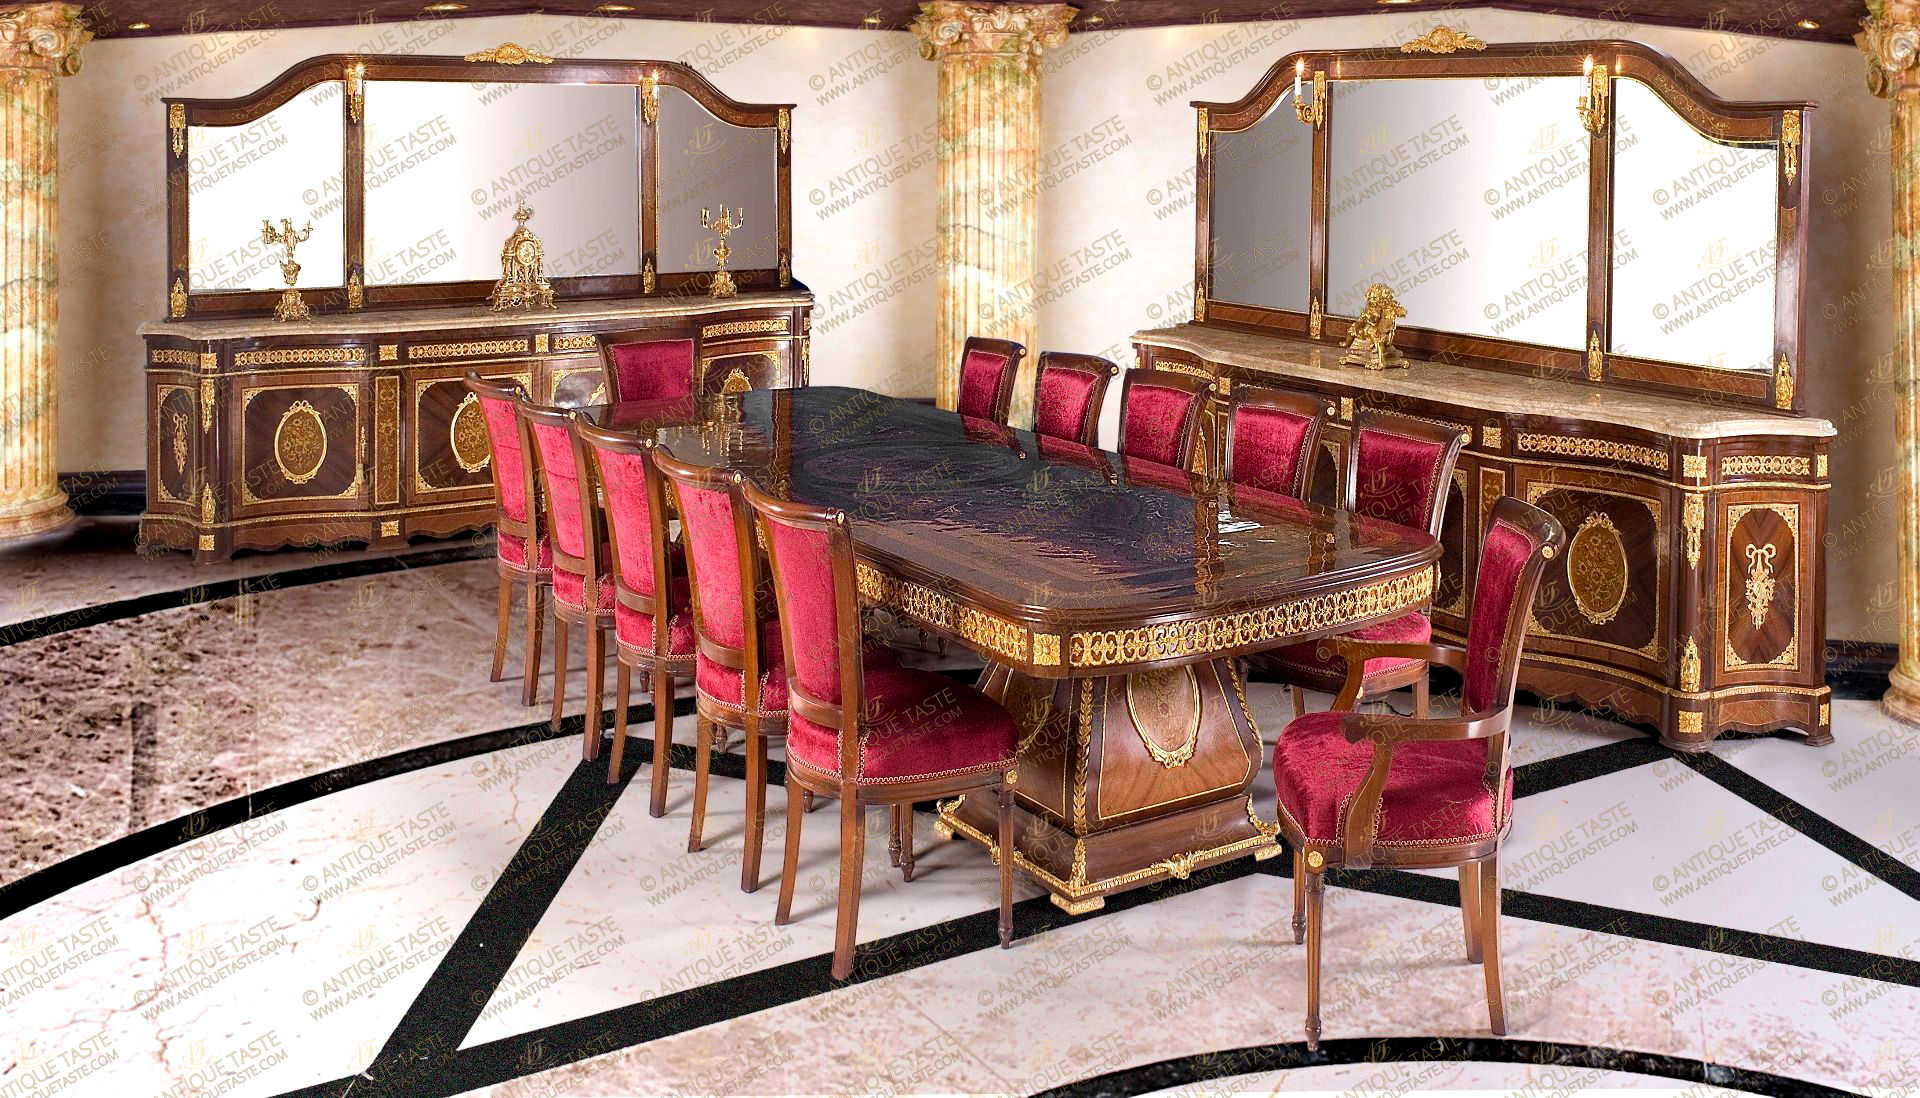 A sublime French Napoleon III style fifteen pieces Grand Royal Dining Room Set; comprising of one grand dining table, ten dining chairs, pair of dining armchairs and pair of marble topped grand buffet with mirror; detailedly and elaborately ormolu-mounted with scrolling Rinceau style foliate movements, double guilloche ormolu mounts, ribbon-tied suspending bouquet mount of draped quiver and family crest, acanthus spinosus leaves, different ormolu bands of leaf-and-dart, egg-and-dart, ribbon-tied foliate medallions, square and circular rosettes, large pierced acanthus chutes, ormolu foliate cresting, olive-bay-leaves bands and foliate keyhole escutcheons; inlaid in an exquisite floral and sprouting marquetry inlays and double sans-traverse quarter double veneer.